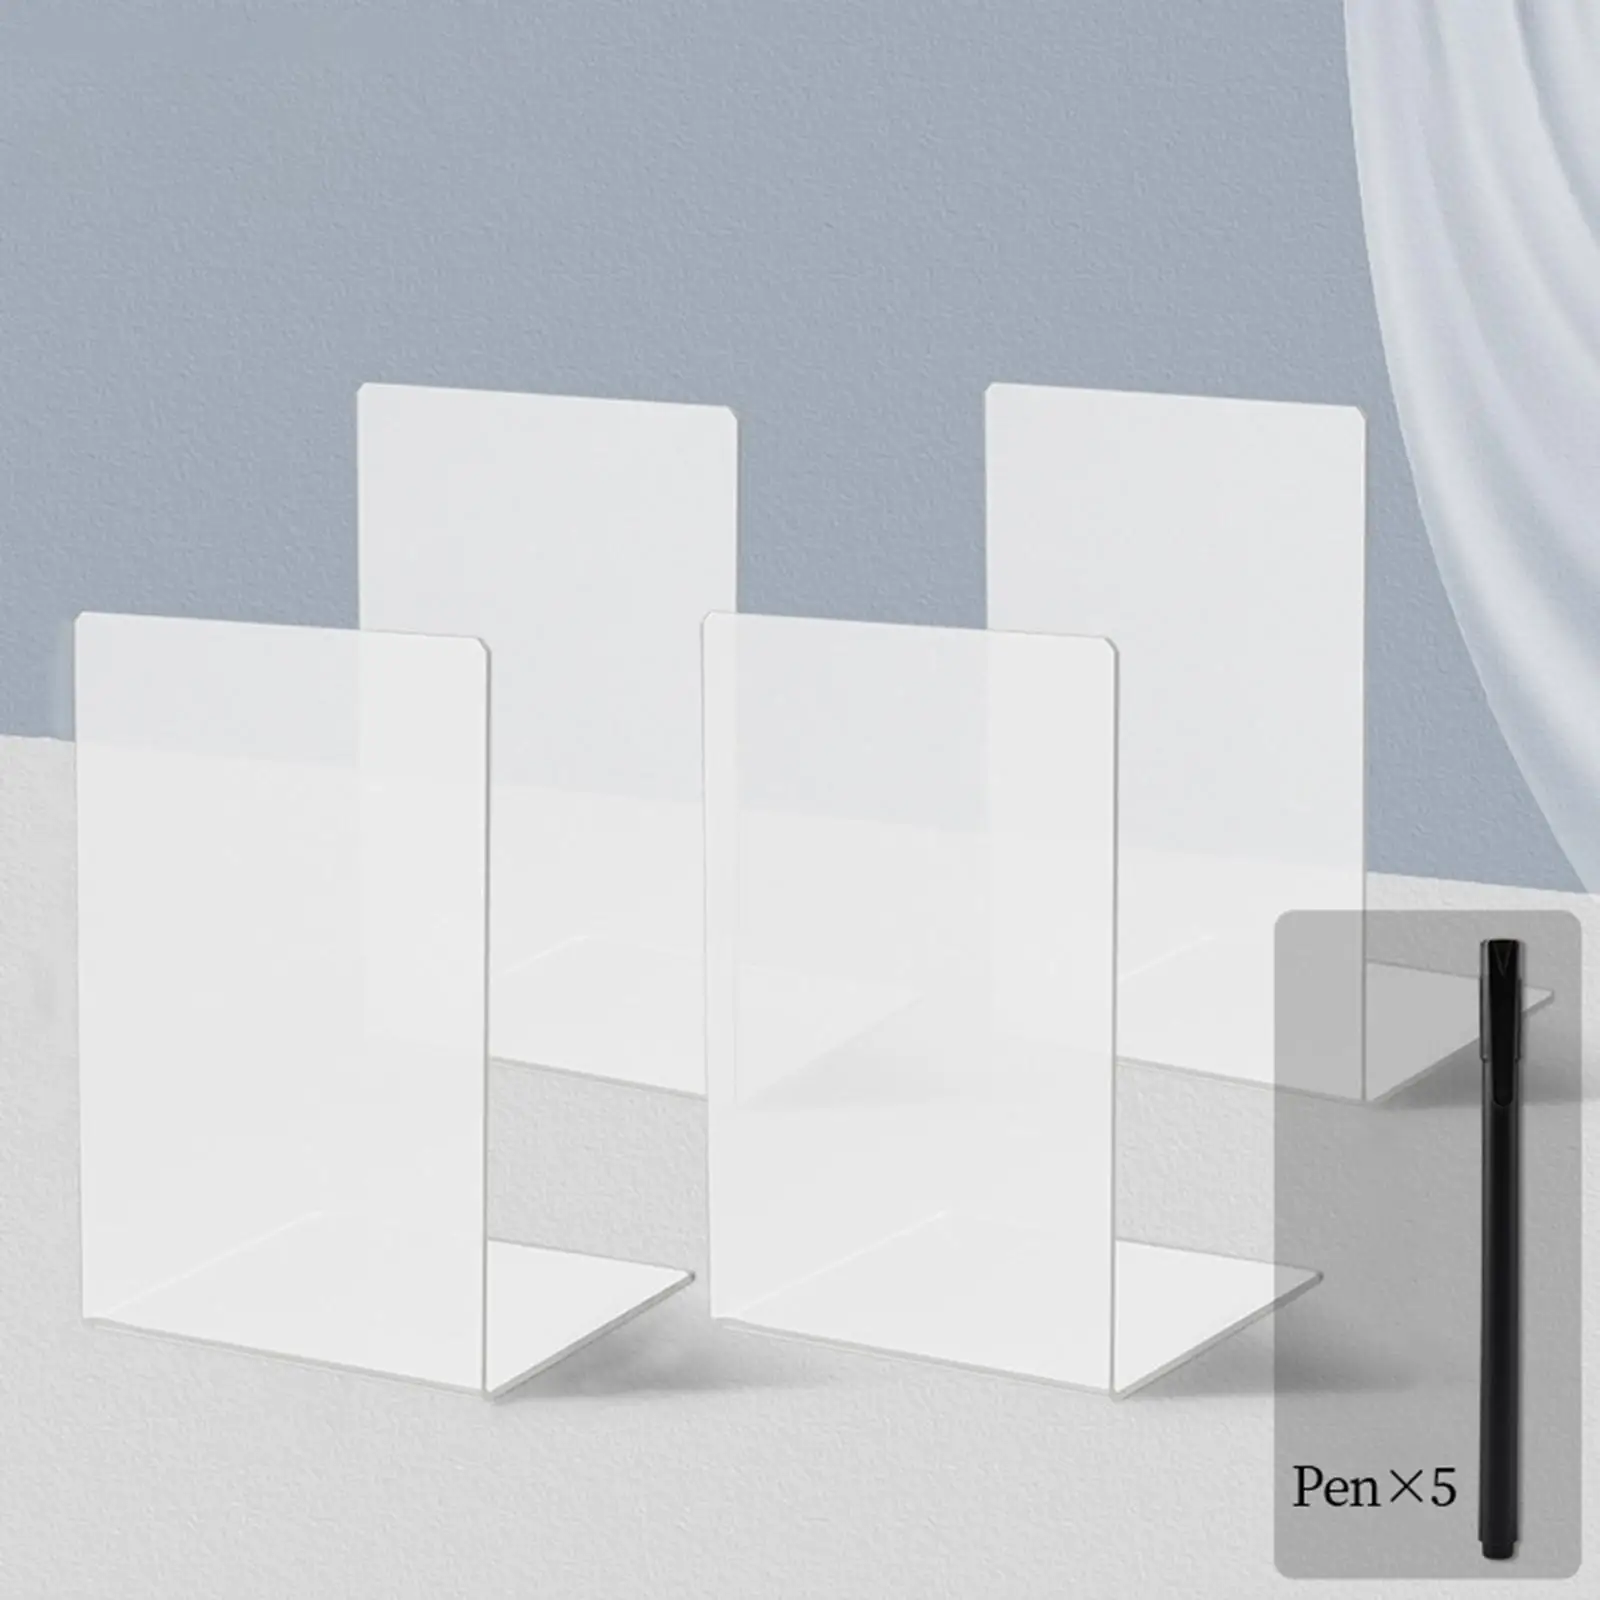 4 Pieces Acrylic Bookends Book Divider for School Stationery Library Books/Movies/, 4.76x4.65x7.40inch